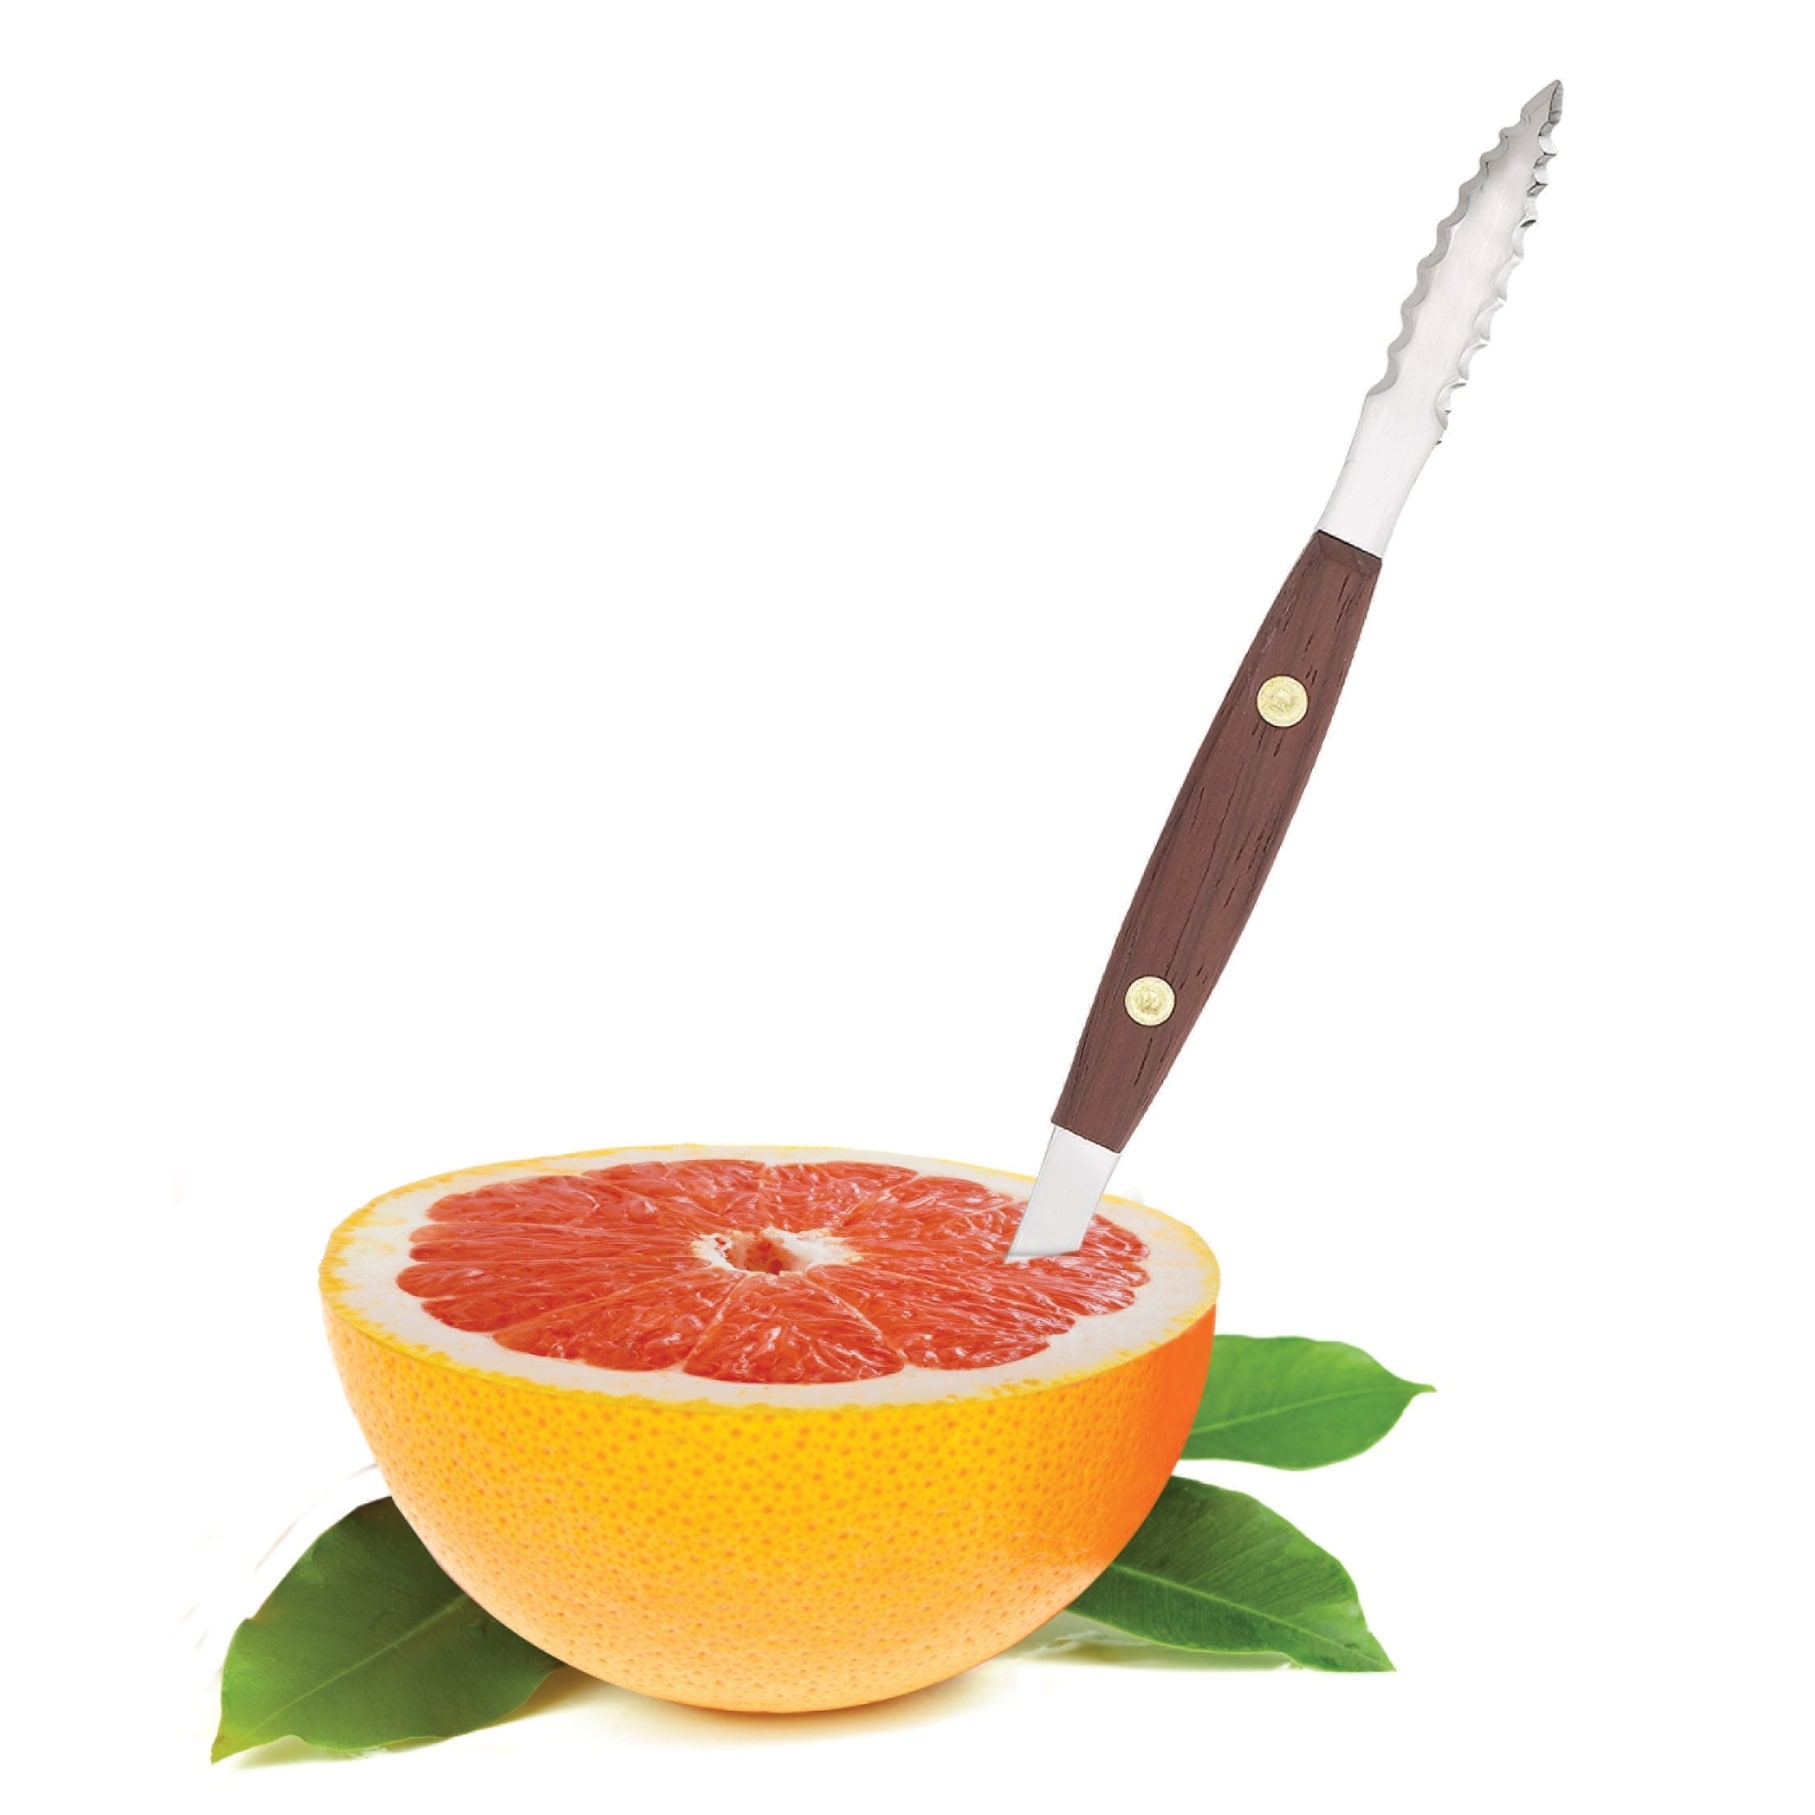 https://ak1.ostkcdn.com/images/products/is/images/direct/0d3065de53cf4bbc0854bdc19769bb73ef036cce/HIC-Squirt-Free-Double-Edged-Stainless-Steel-Grapefruit-Slicer-Knife.jpg